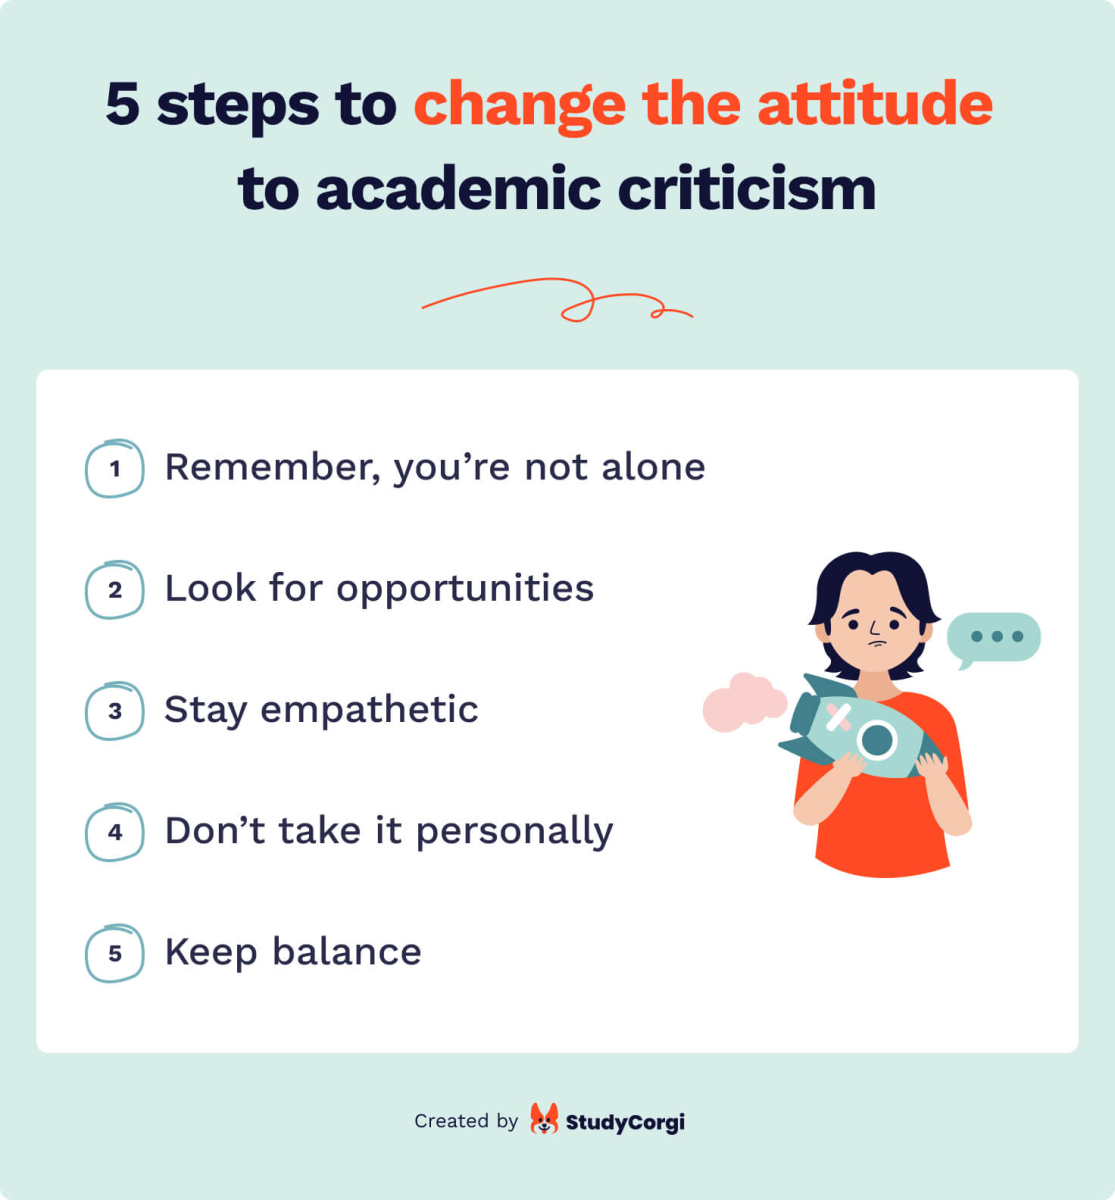 The picture lists the steps that will help you change your attitude to academic criticism.